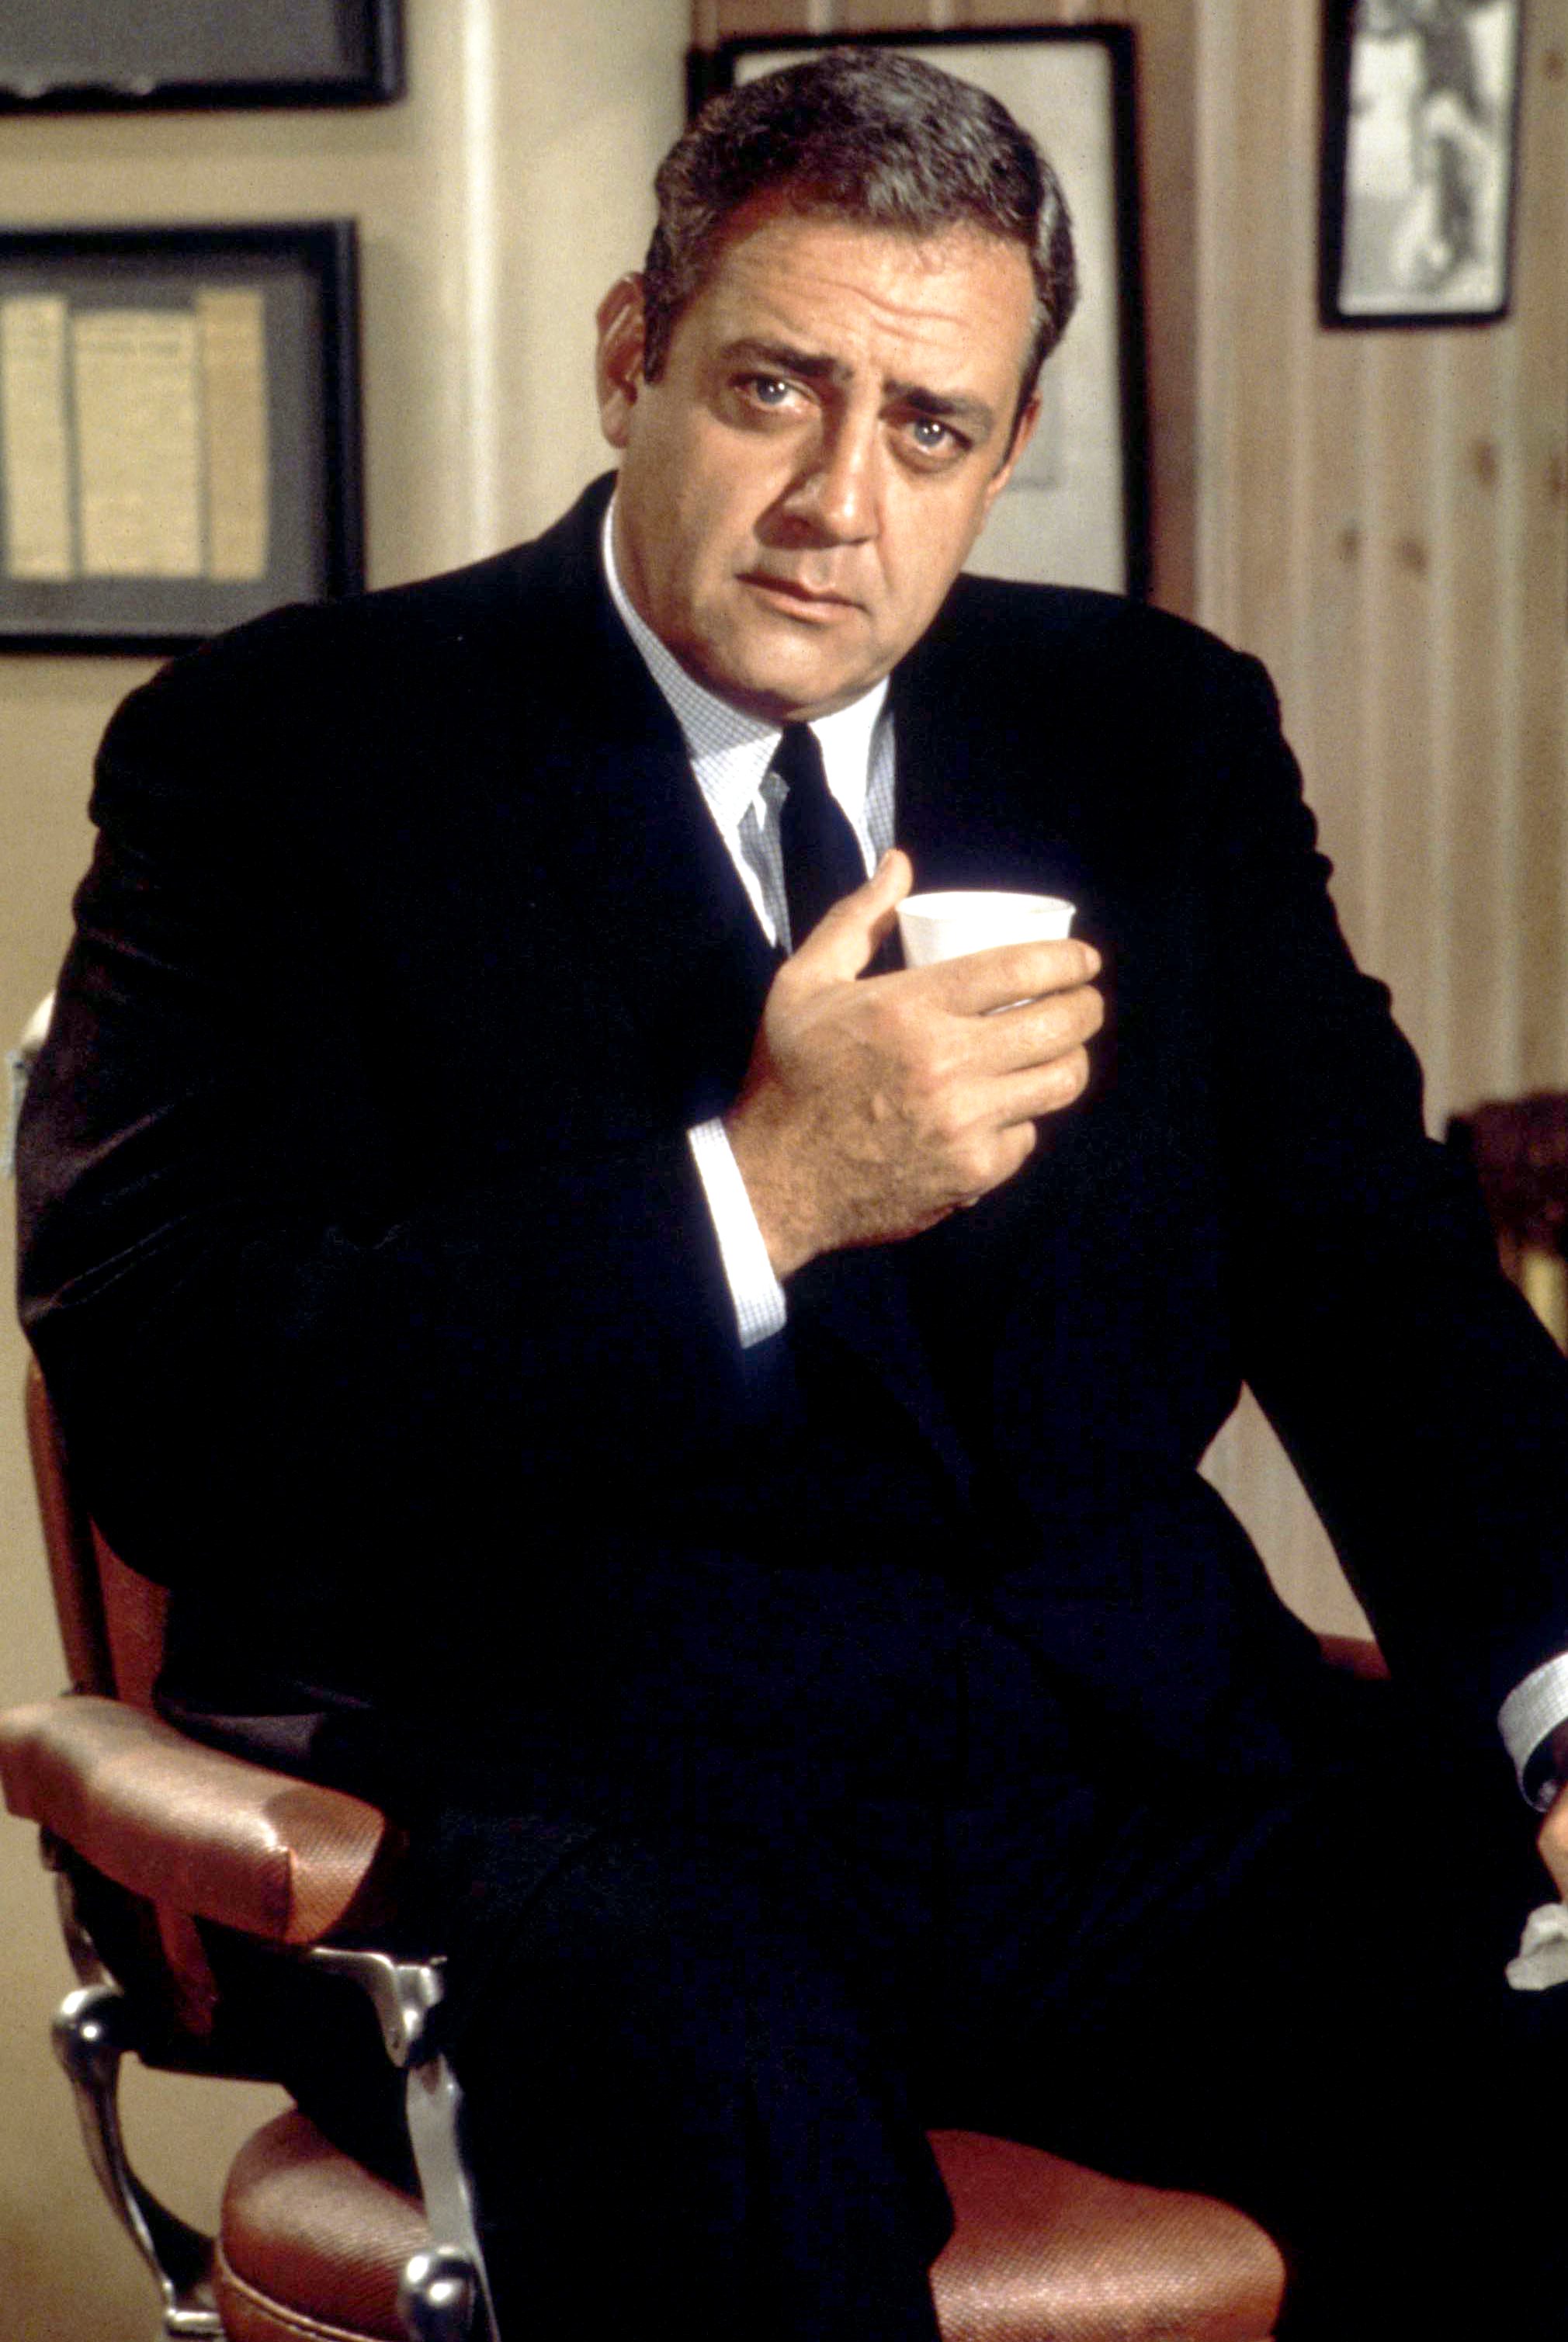 Raymond Burr as Chief of Detectives Robert T. Ironside, in the police drama "Ironside" in 1975 in Los Angeles, California. | Source: Getty Images